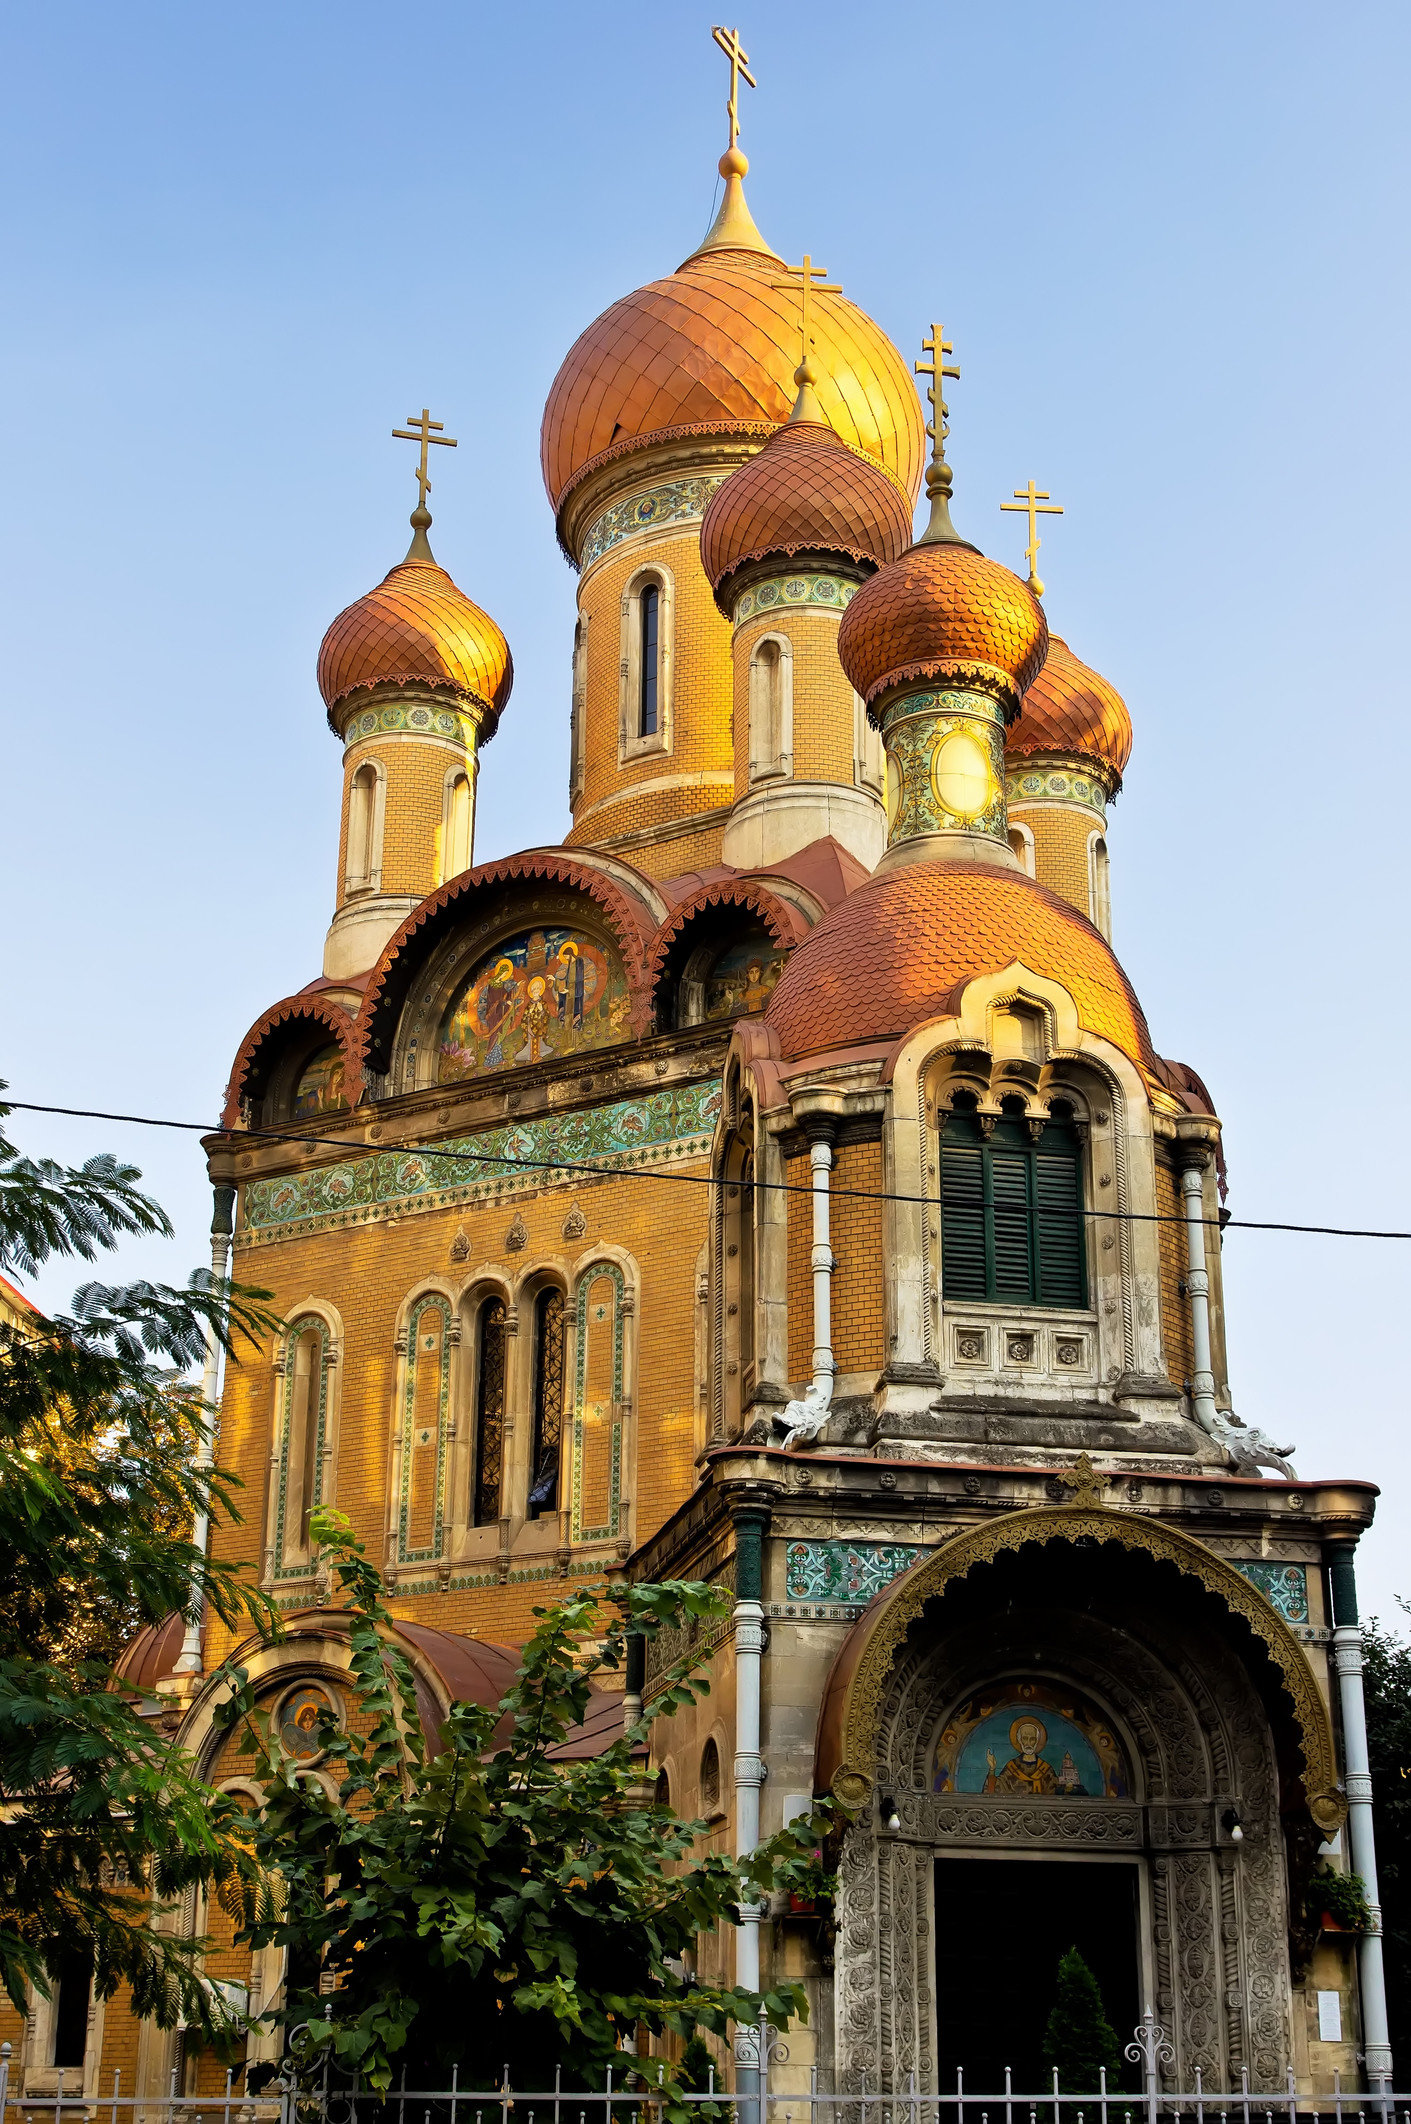 Trip Ideas sky outdoor building landmark place of worship byzantine architecture Church dome bell tower cathedral facade monastery basilica tower spanish missions in california synagogue old stone